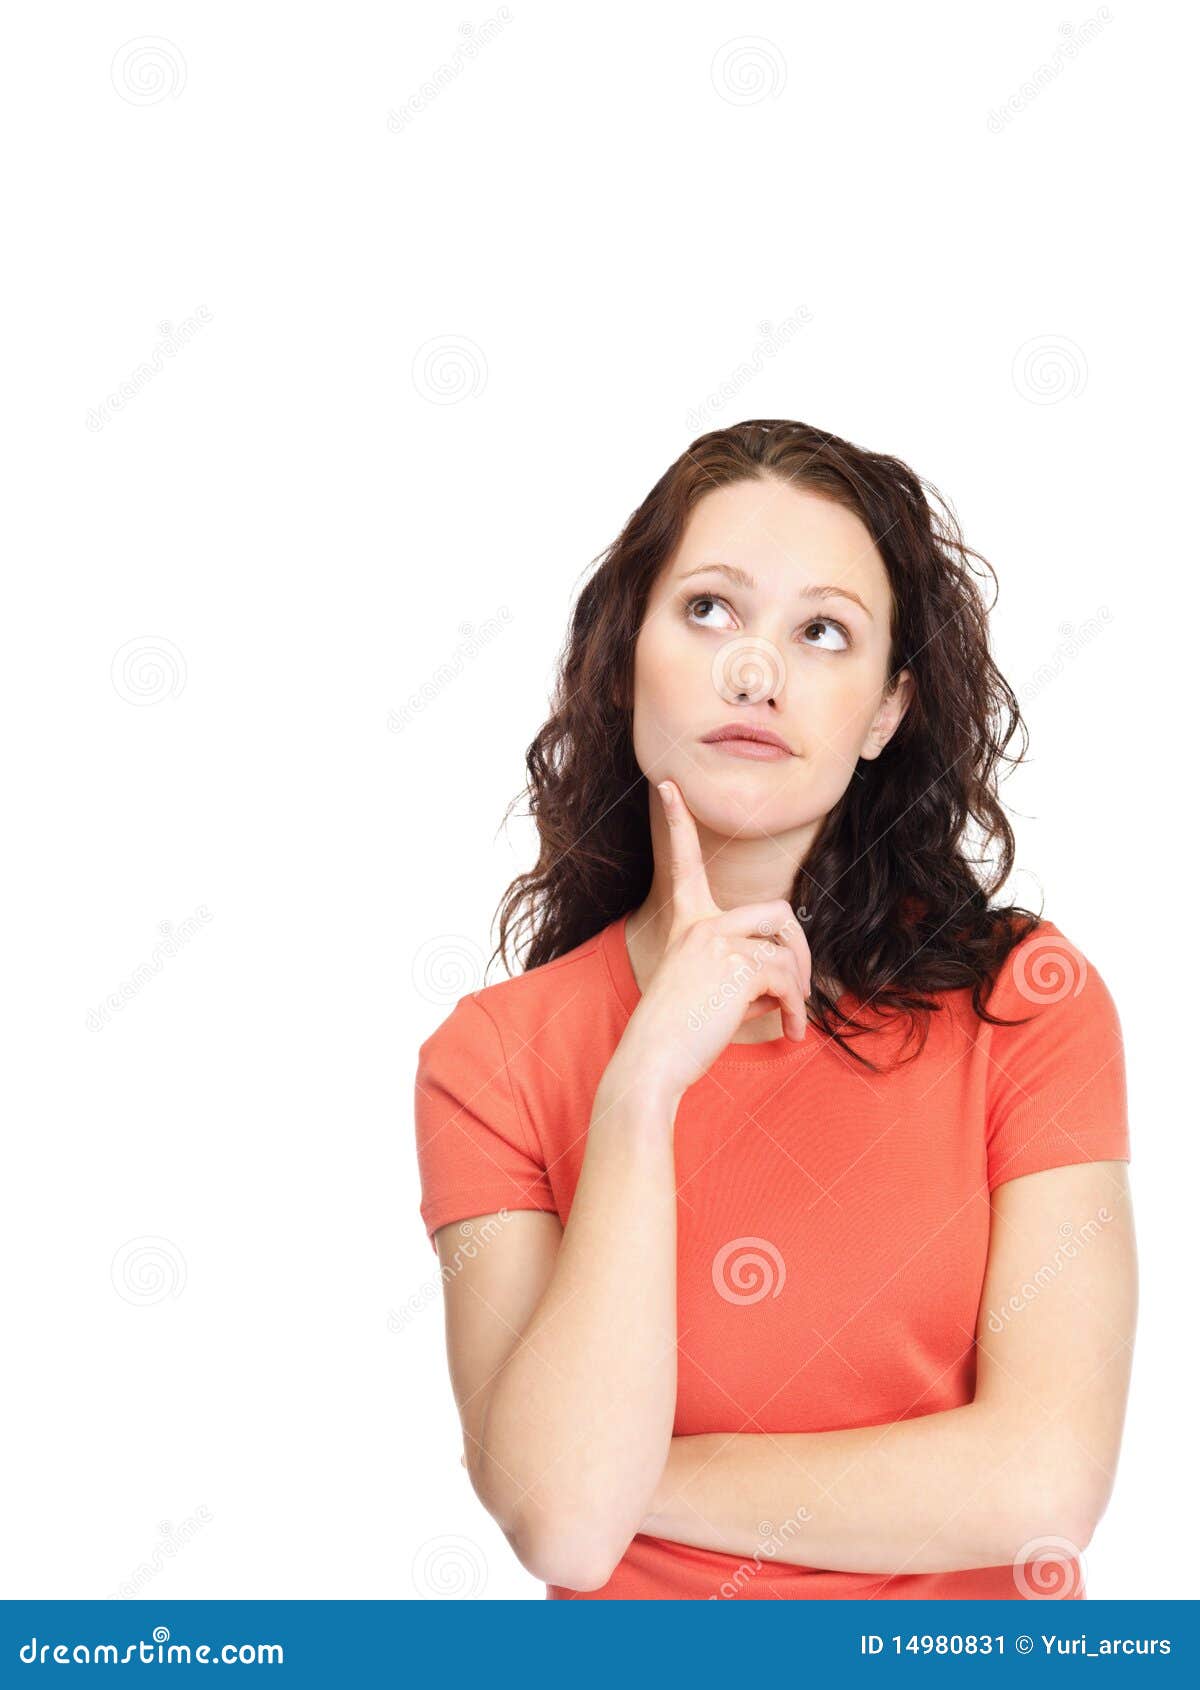 Stock Image: Female looking thoughtfully at copyspace on ...
